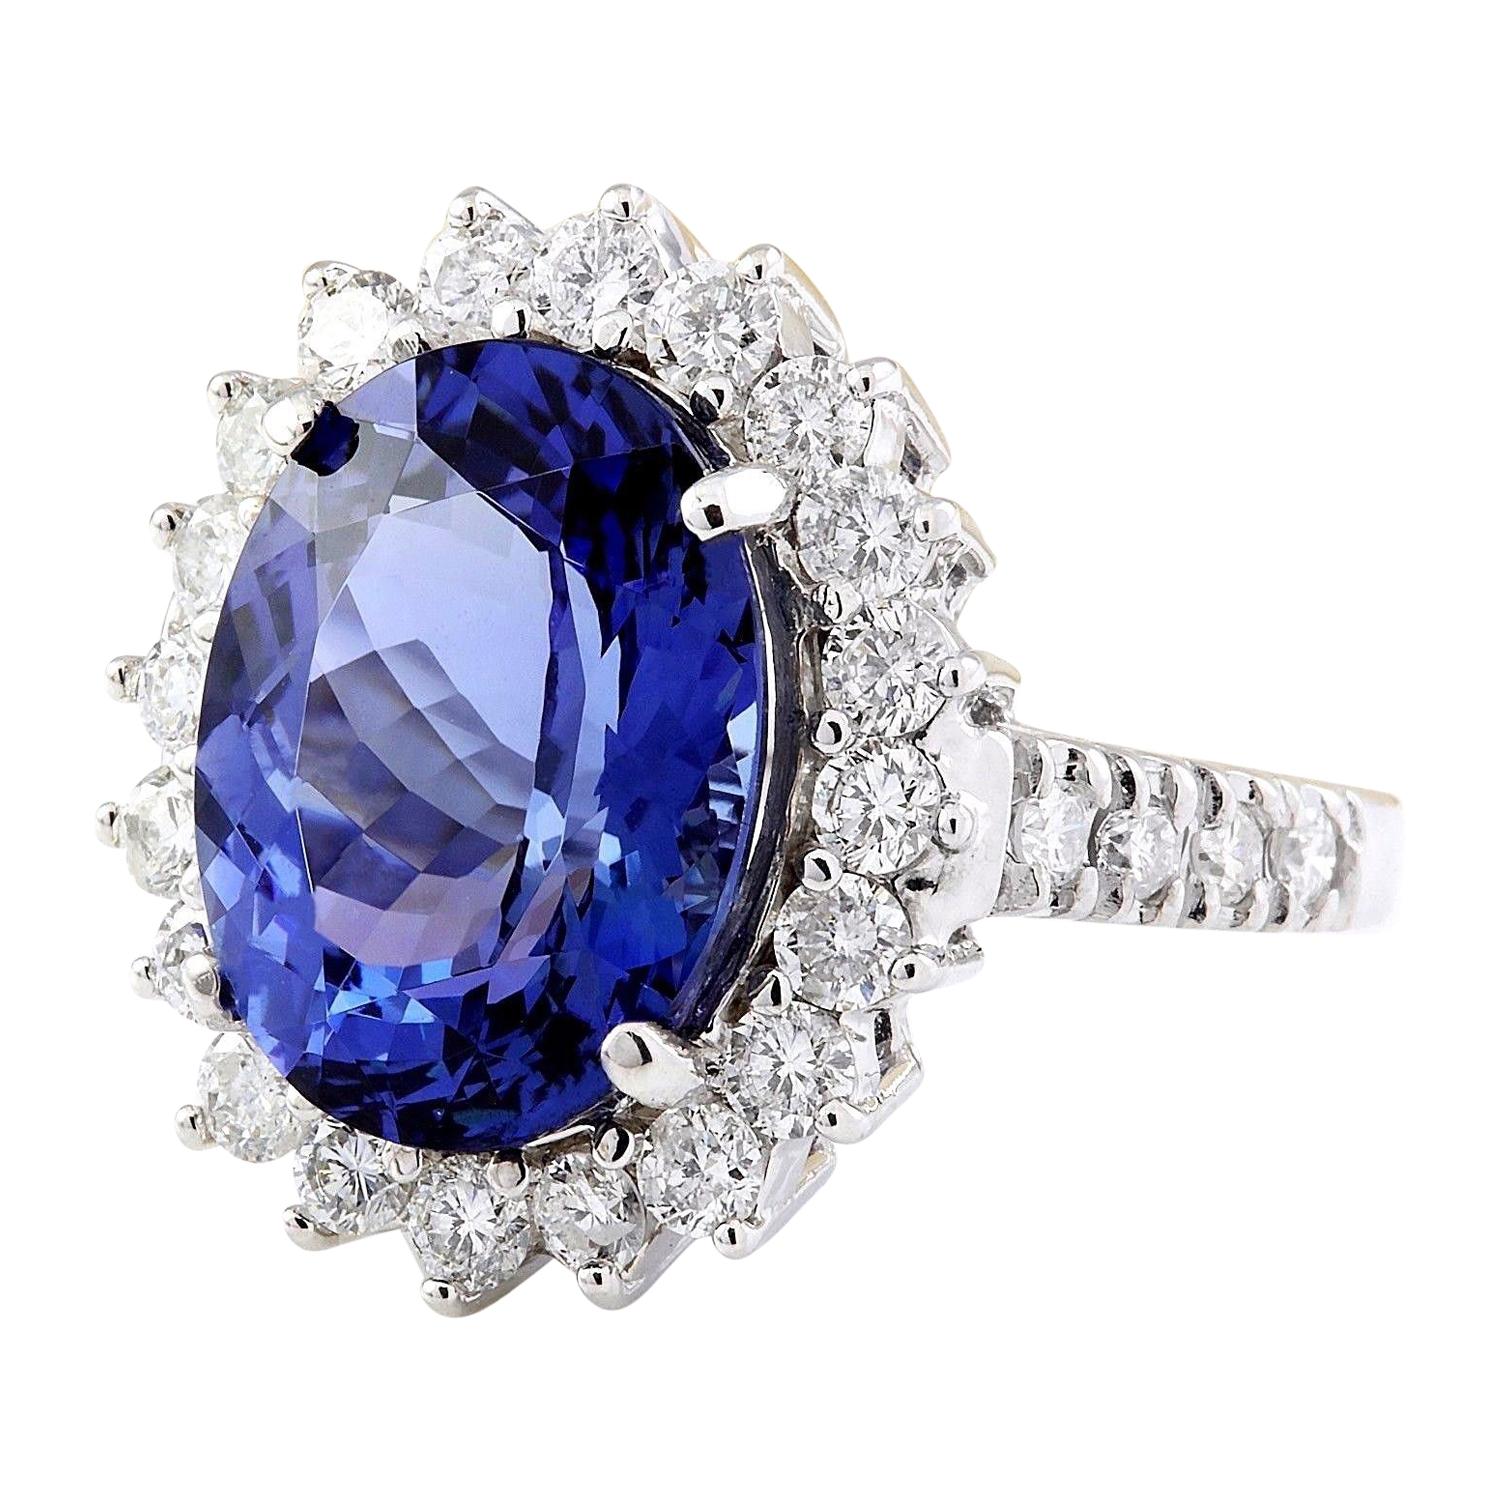 9.51 Carat  Tanzanite 18K Solid White Gold Diamond Ring
Item Type: Ring
Item Style: Engagement
Material: 18K White Gold
Mainstone: Tanzanite
Stone Color: Blue
Stone Weight: 8.11 Carat
Stone Shape: Oval
Stone Quantity: 1
Stone Dimensions: 14.30x10.85